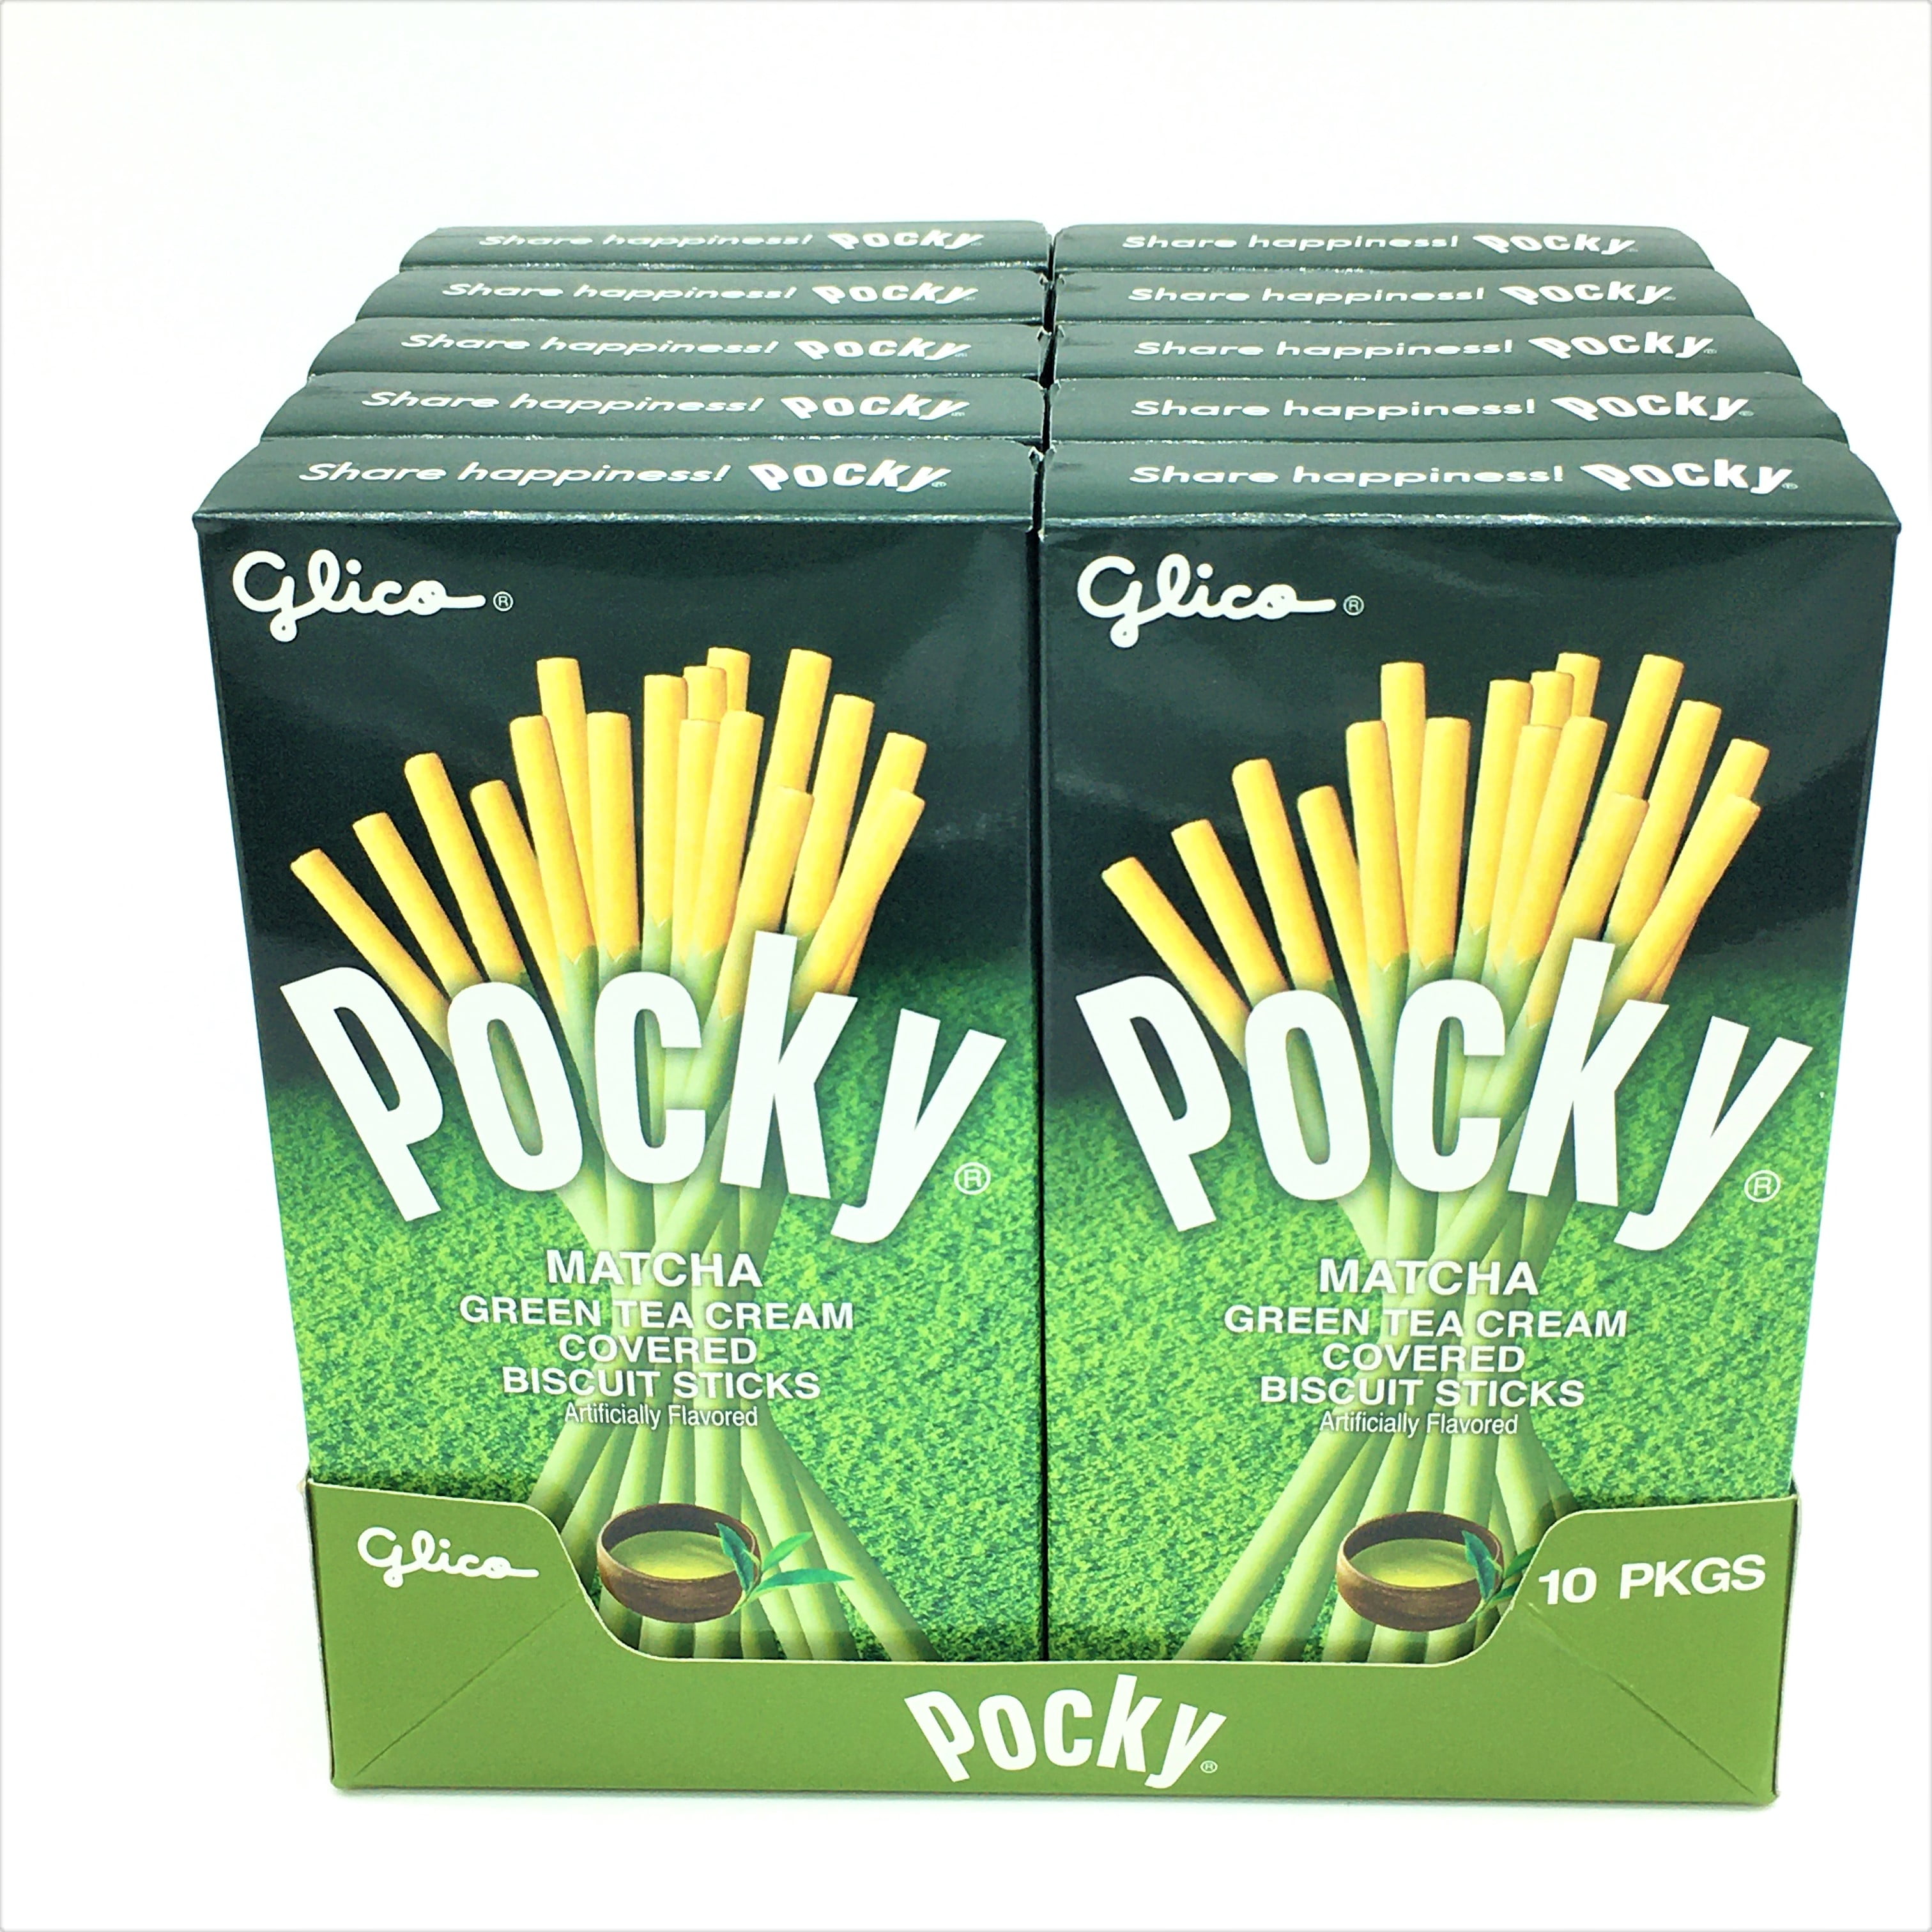 Pocky Limited Edition Mint Cream Covered Cocoa Large 2.47oz box